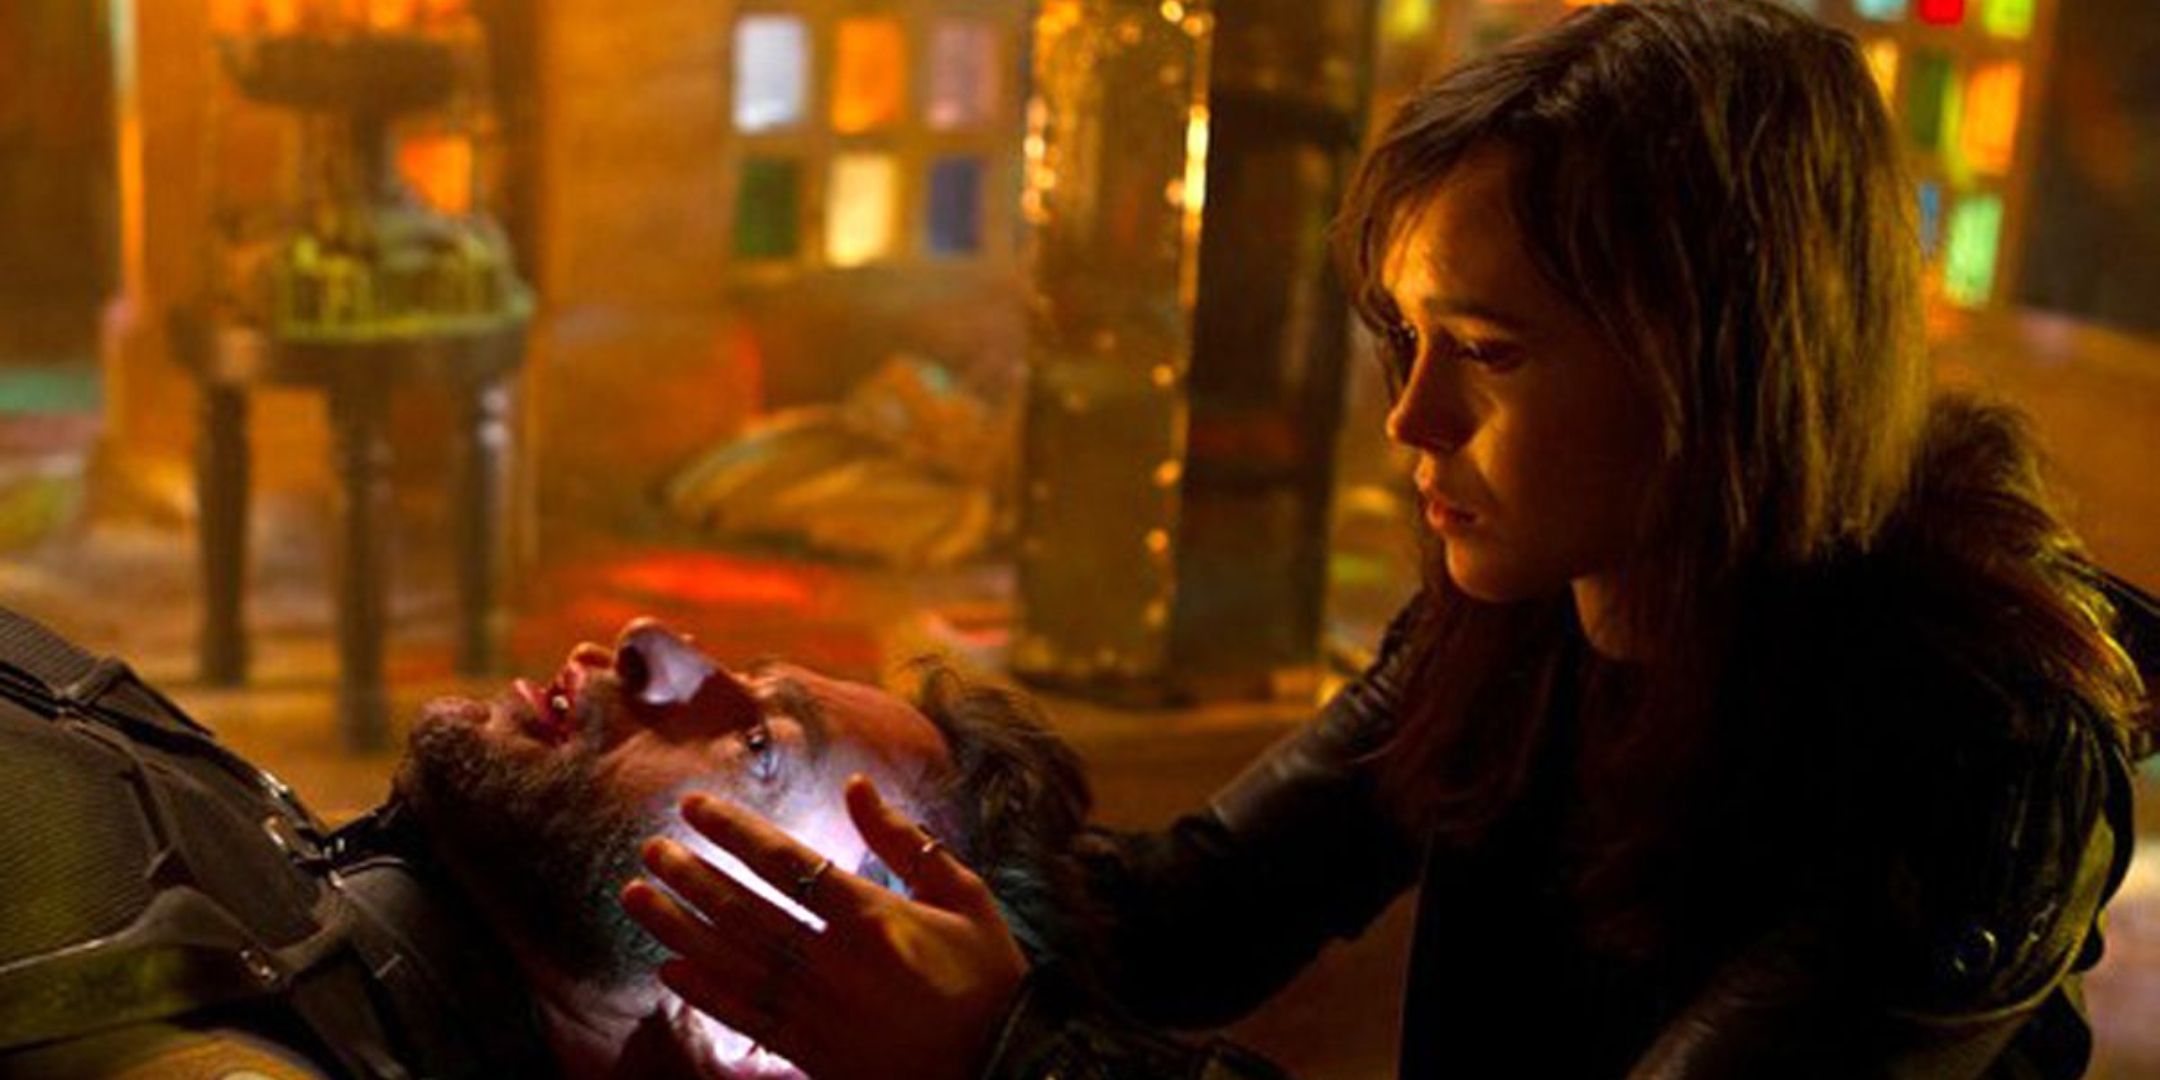 X-Men Days of Future Past Kitty Pryde Sending Wolverine Through Time By Putting Hands Beside His Head